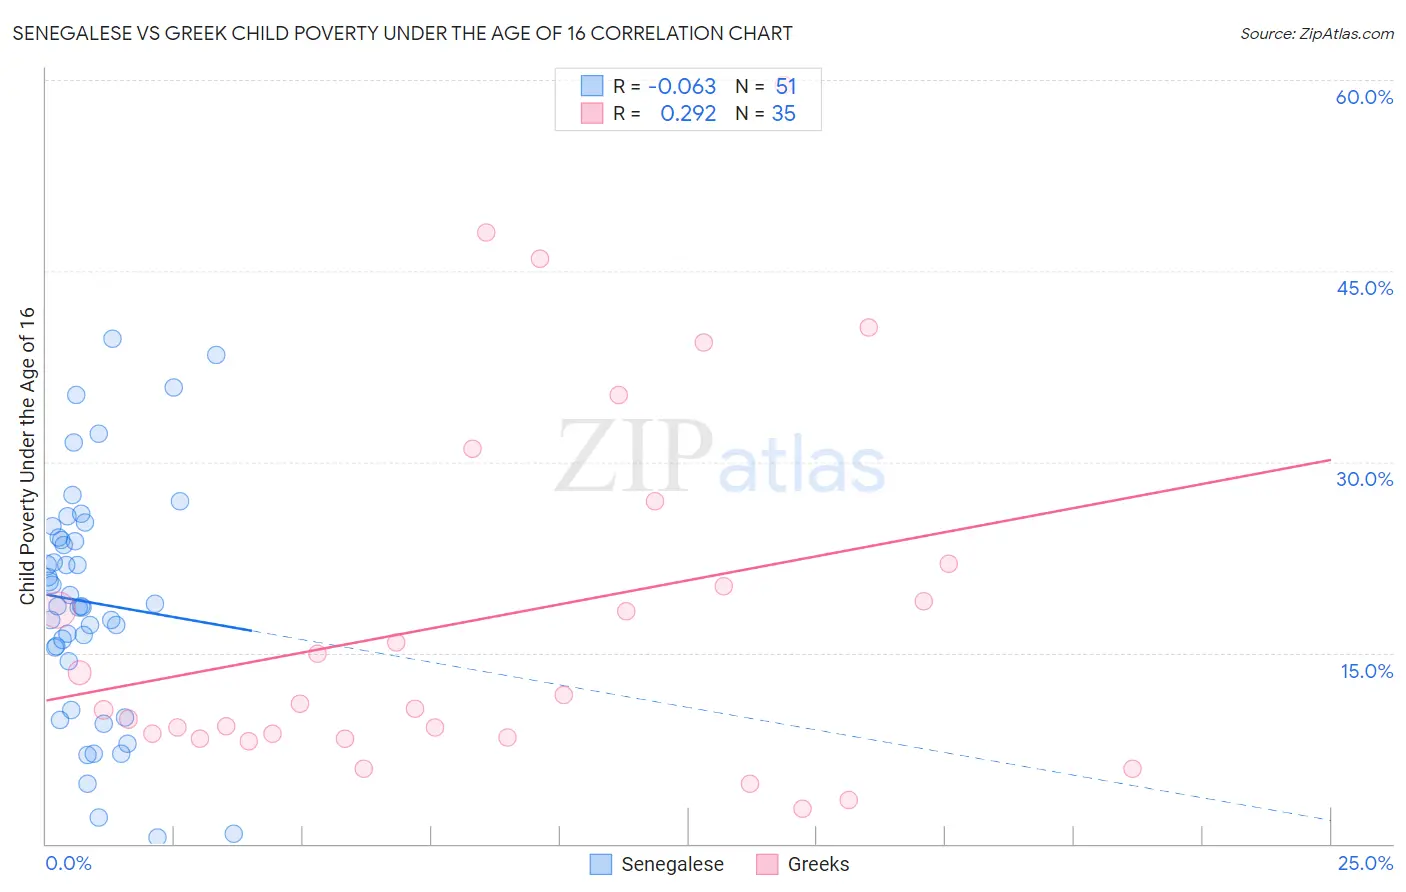 Senegalese vs Greek Child Poverty Under the Age of 16